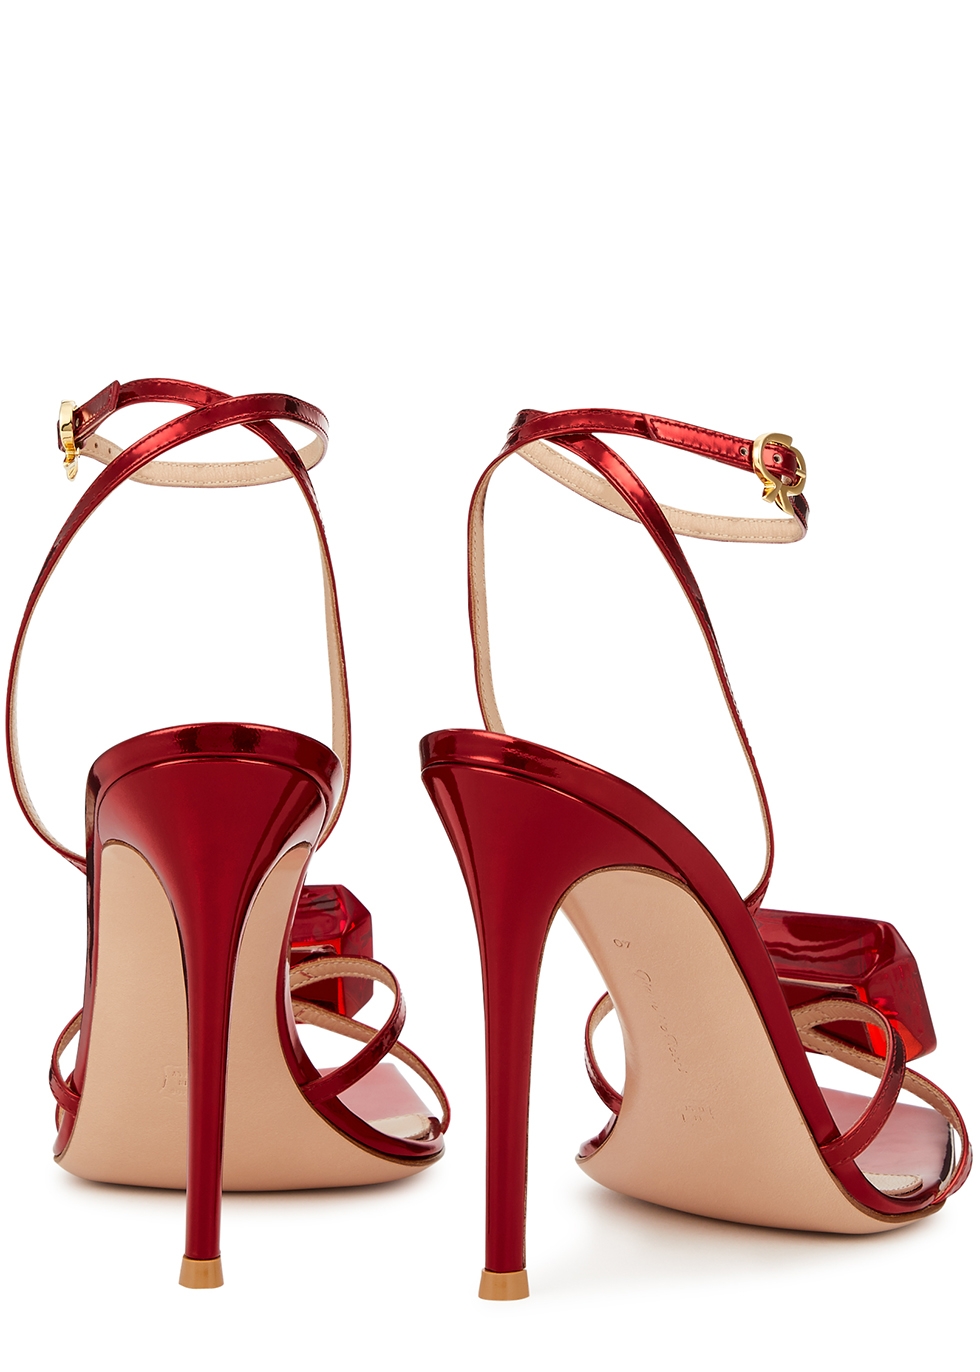 Gianvito Rossi Jaipur Embellished Leather Sandals in Red Womens Shoes Heels Sandal heels 